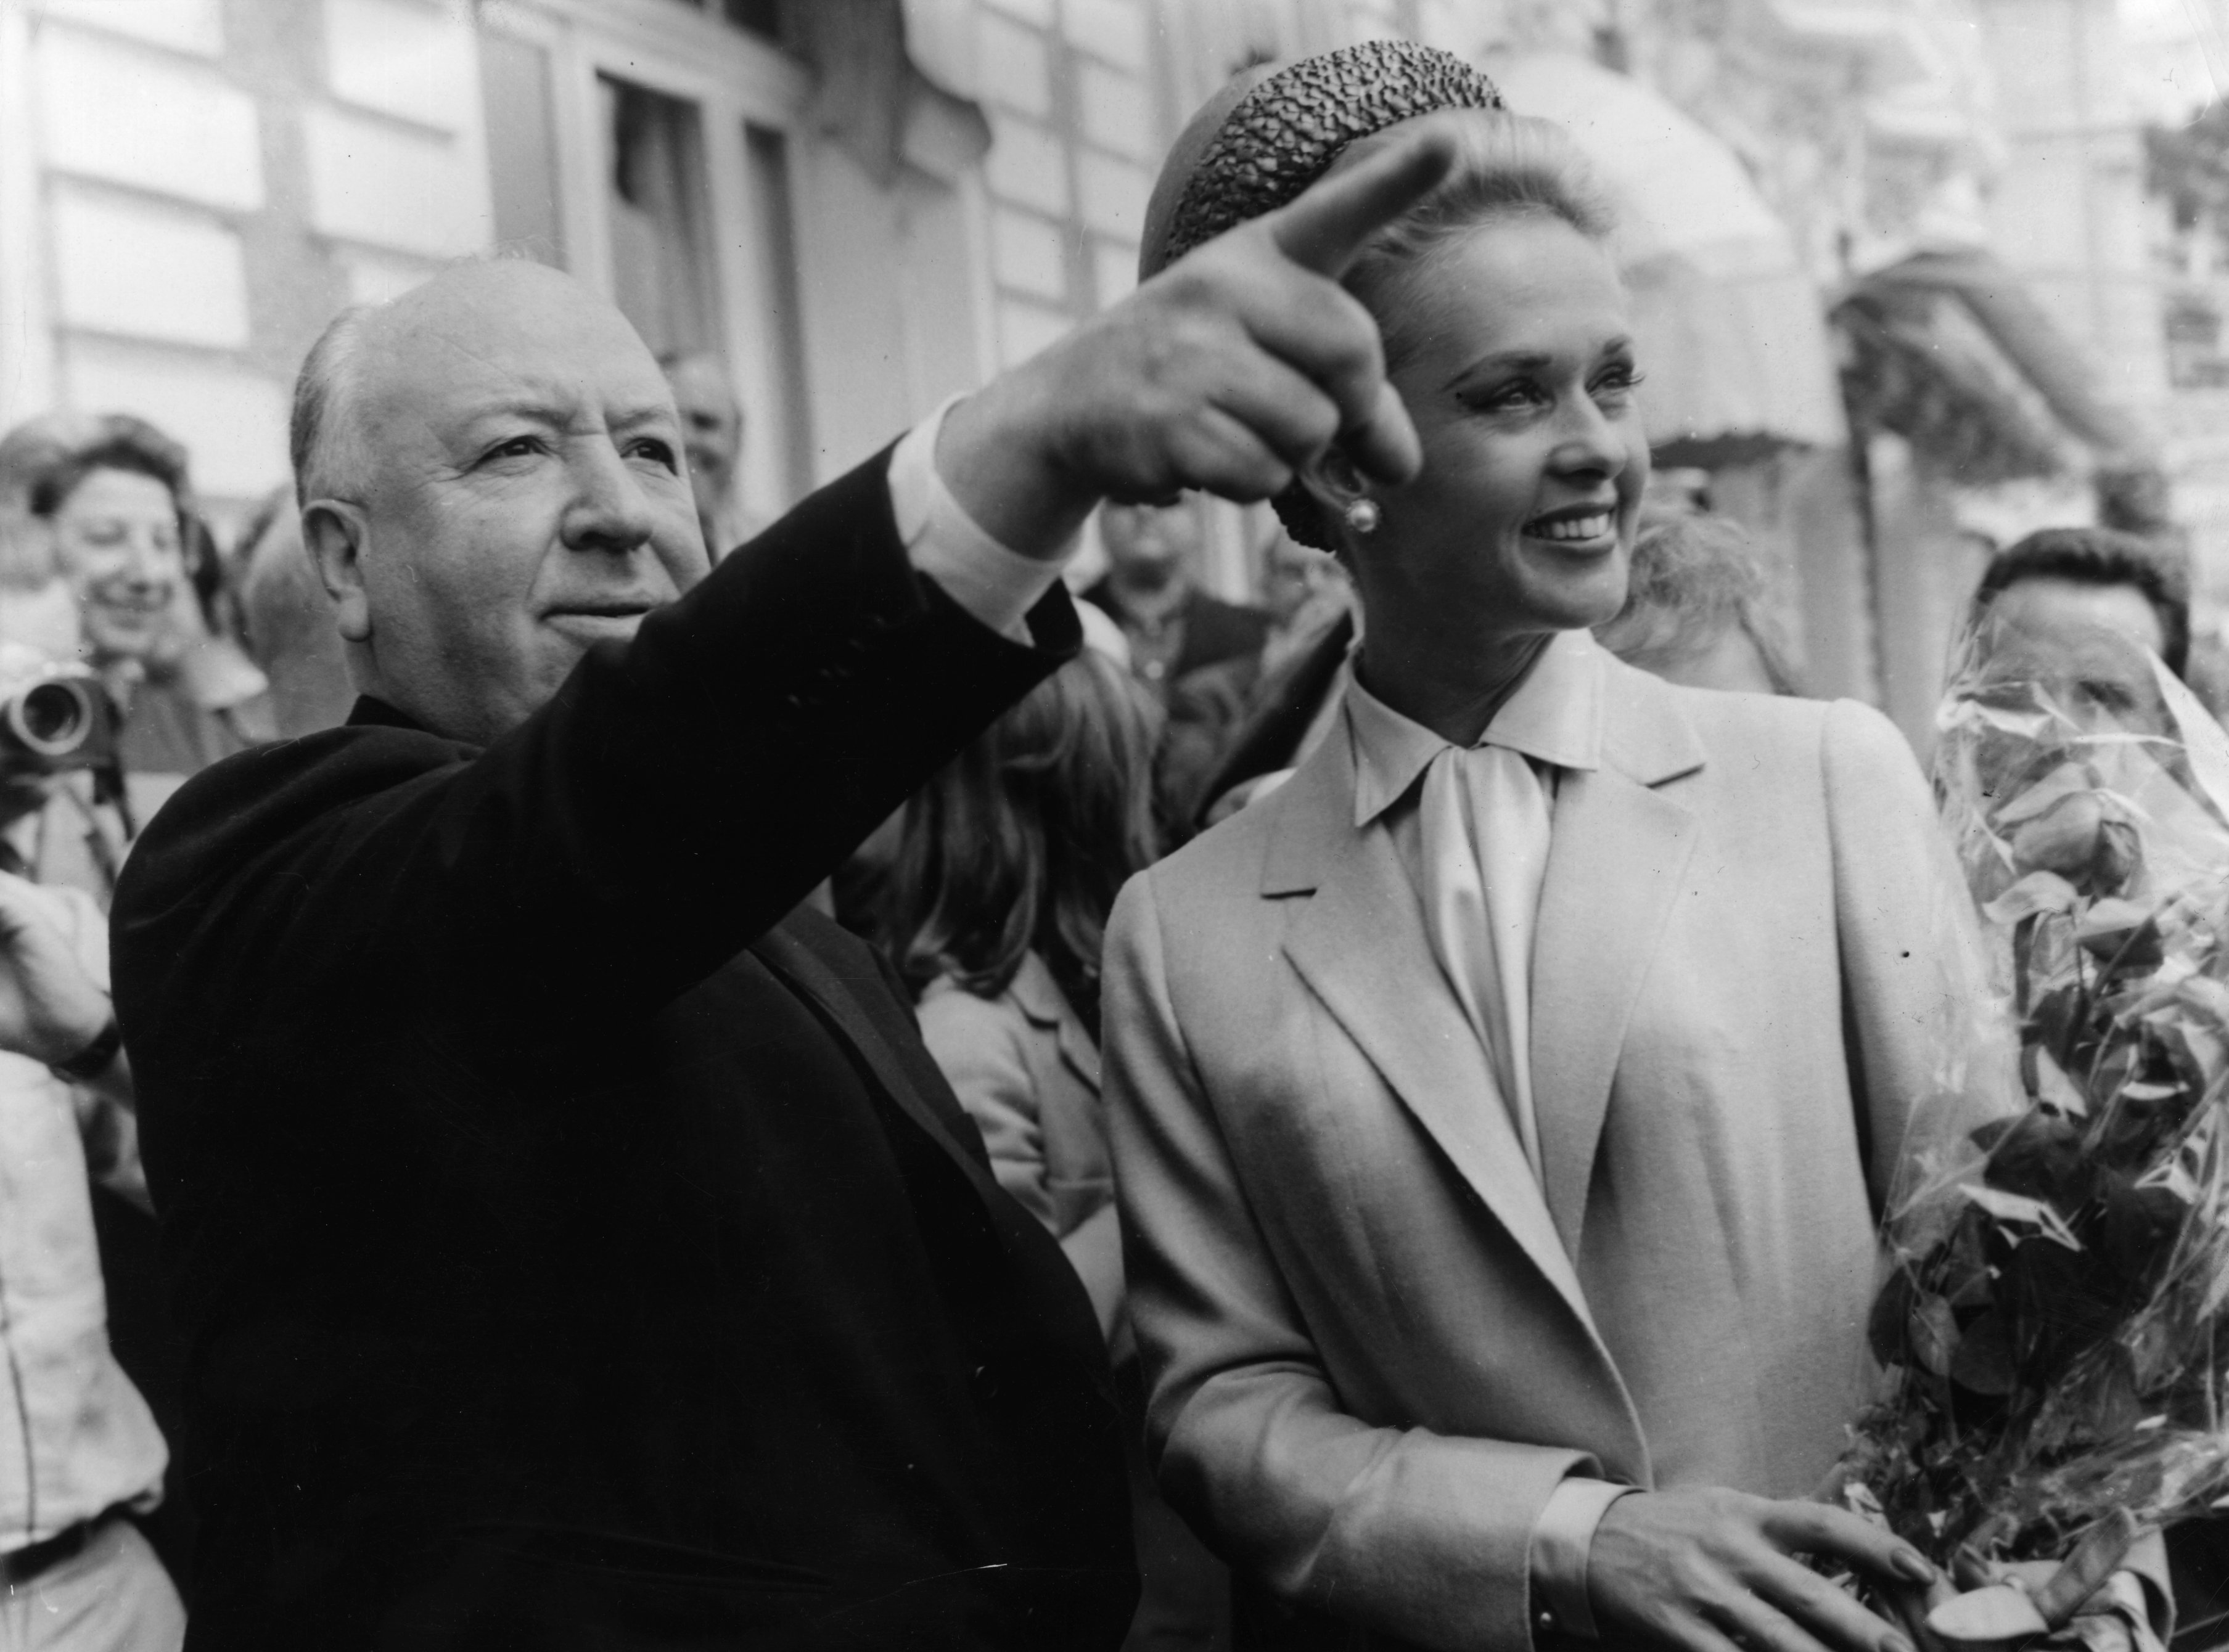 Alfred Hitchcock and Tippi Hedren explore Cannes together on May 9, 1963 | Photo: Getty Images